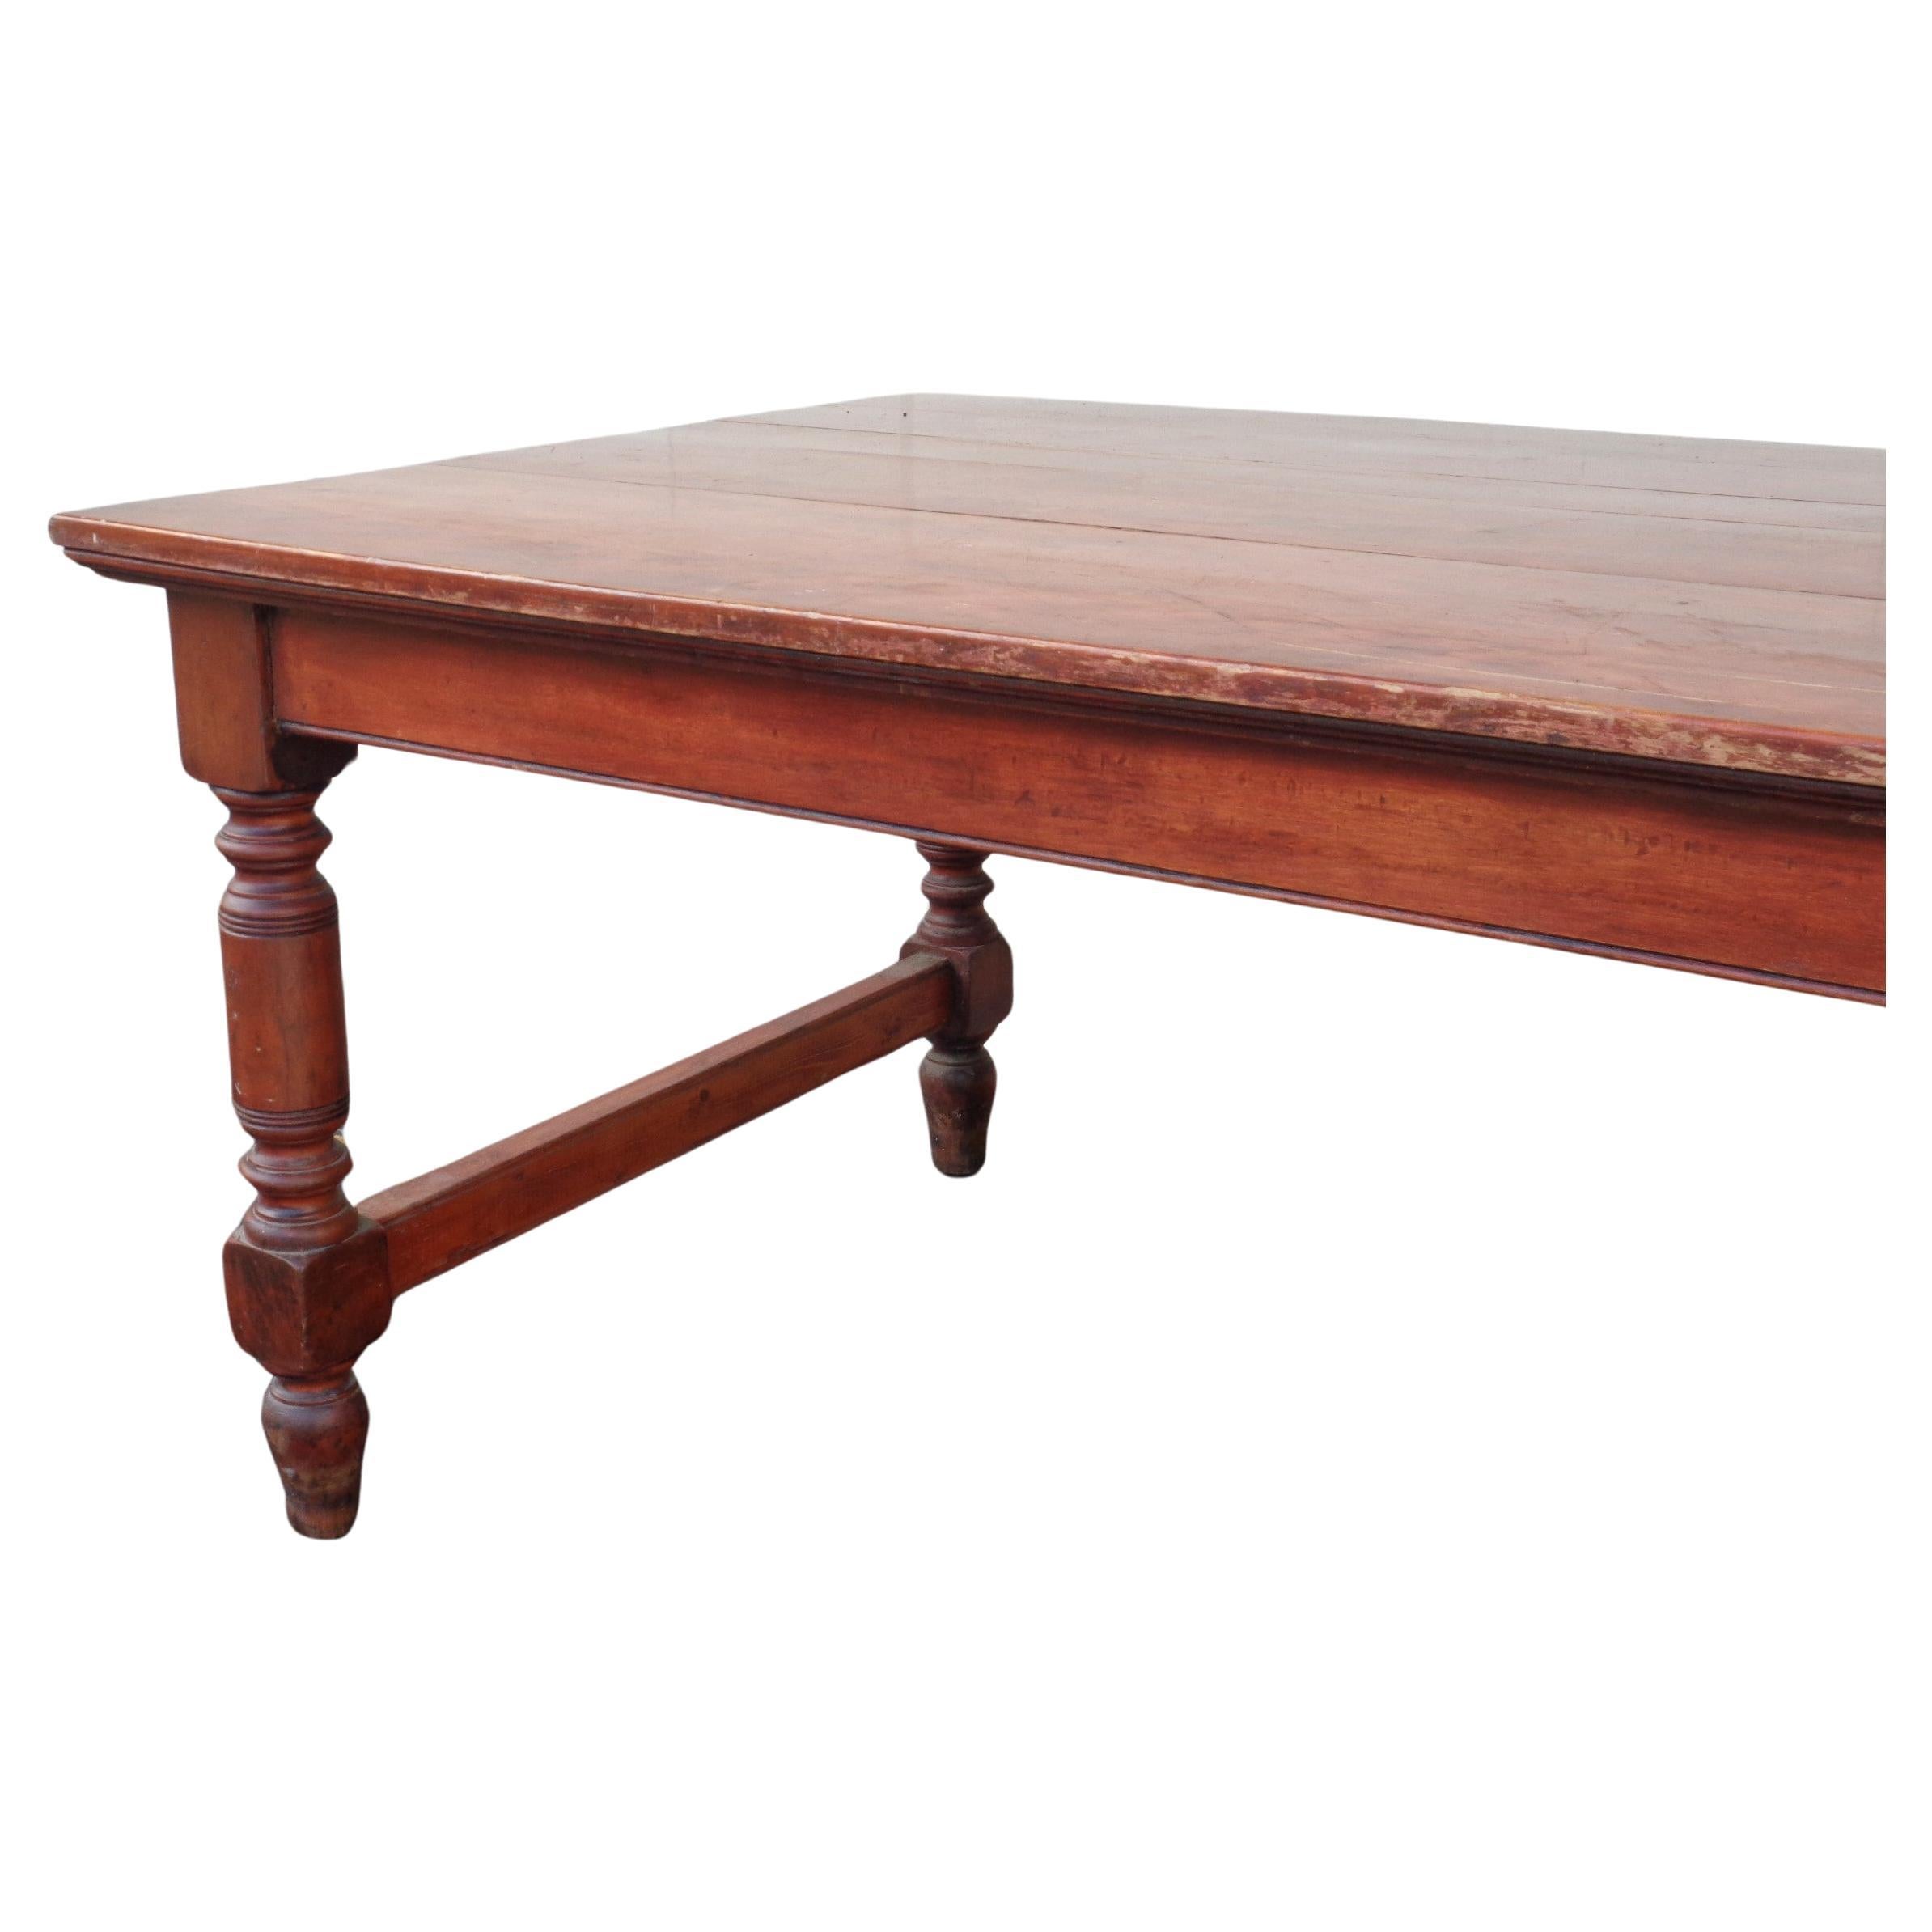 Antique American Banquet Dining Table, 1870-1880 For Sale 6